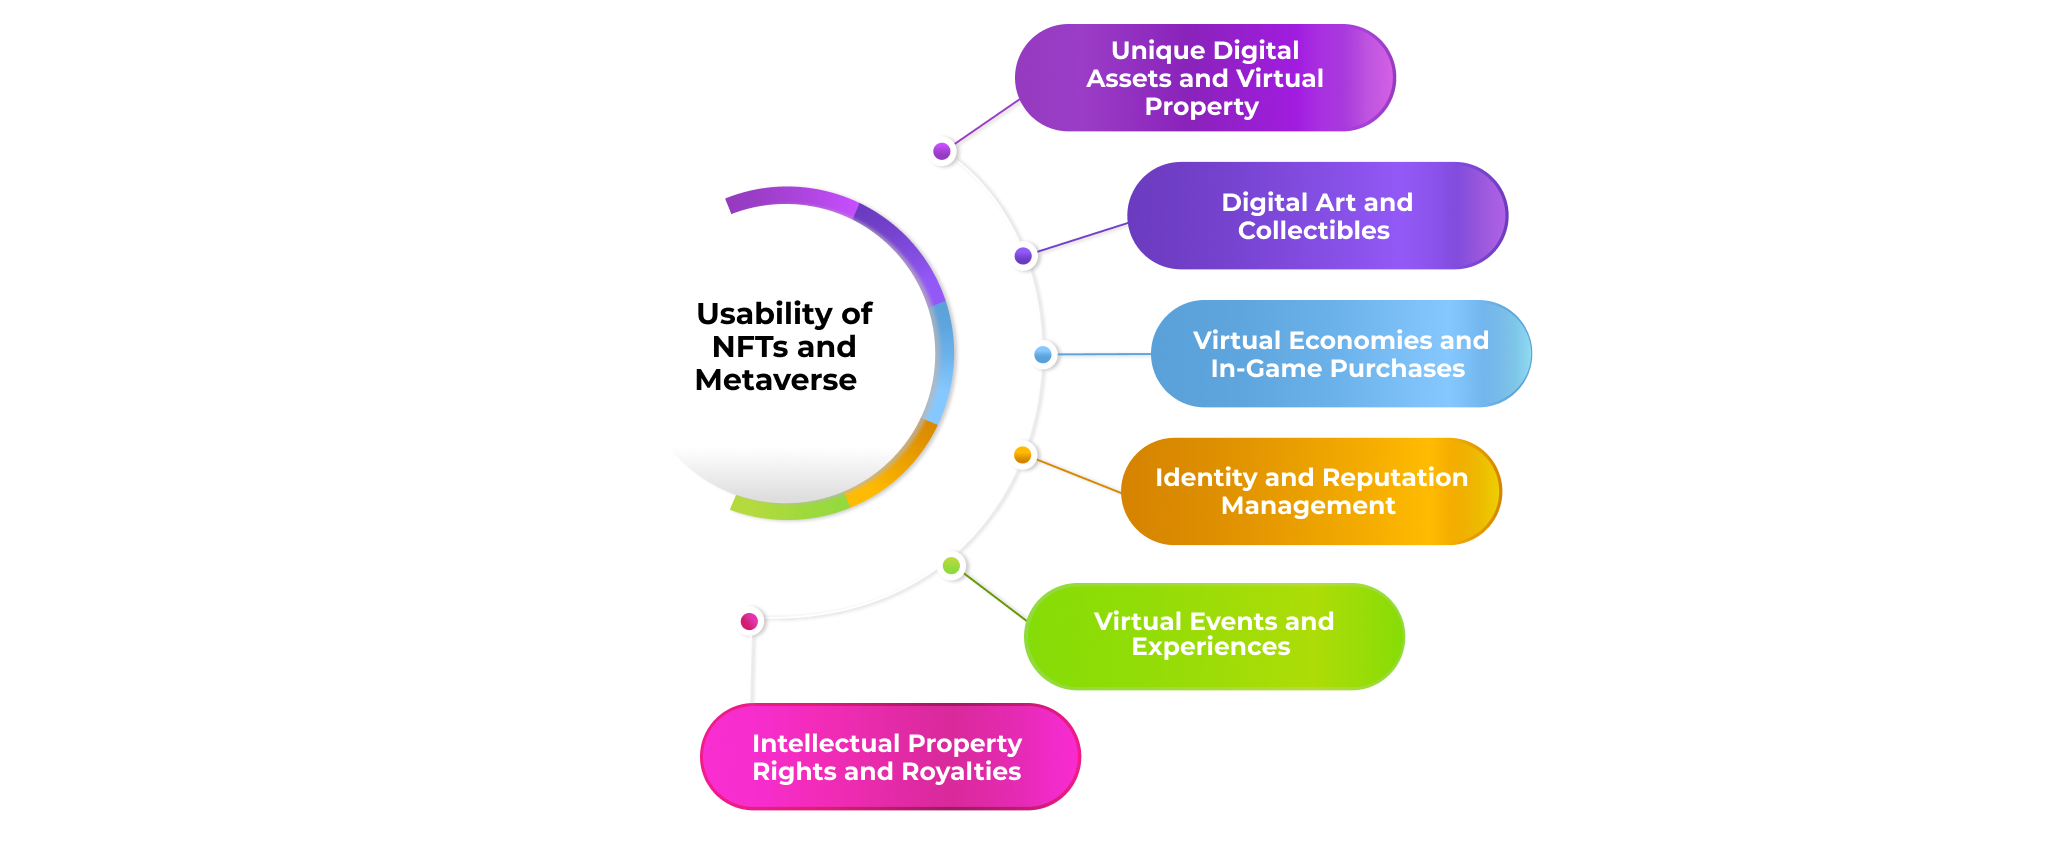 What is the Usability of NFTs and Metaverse?